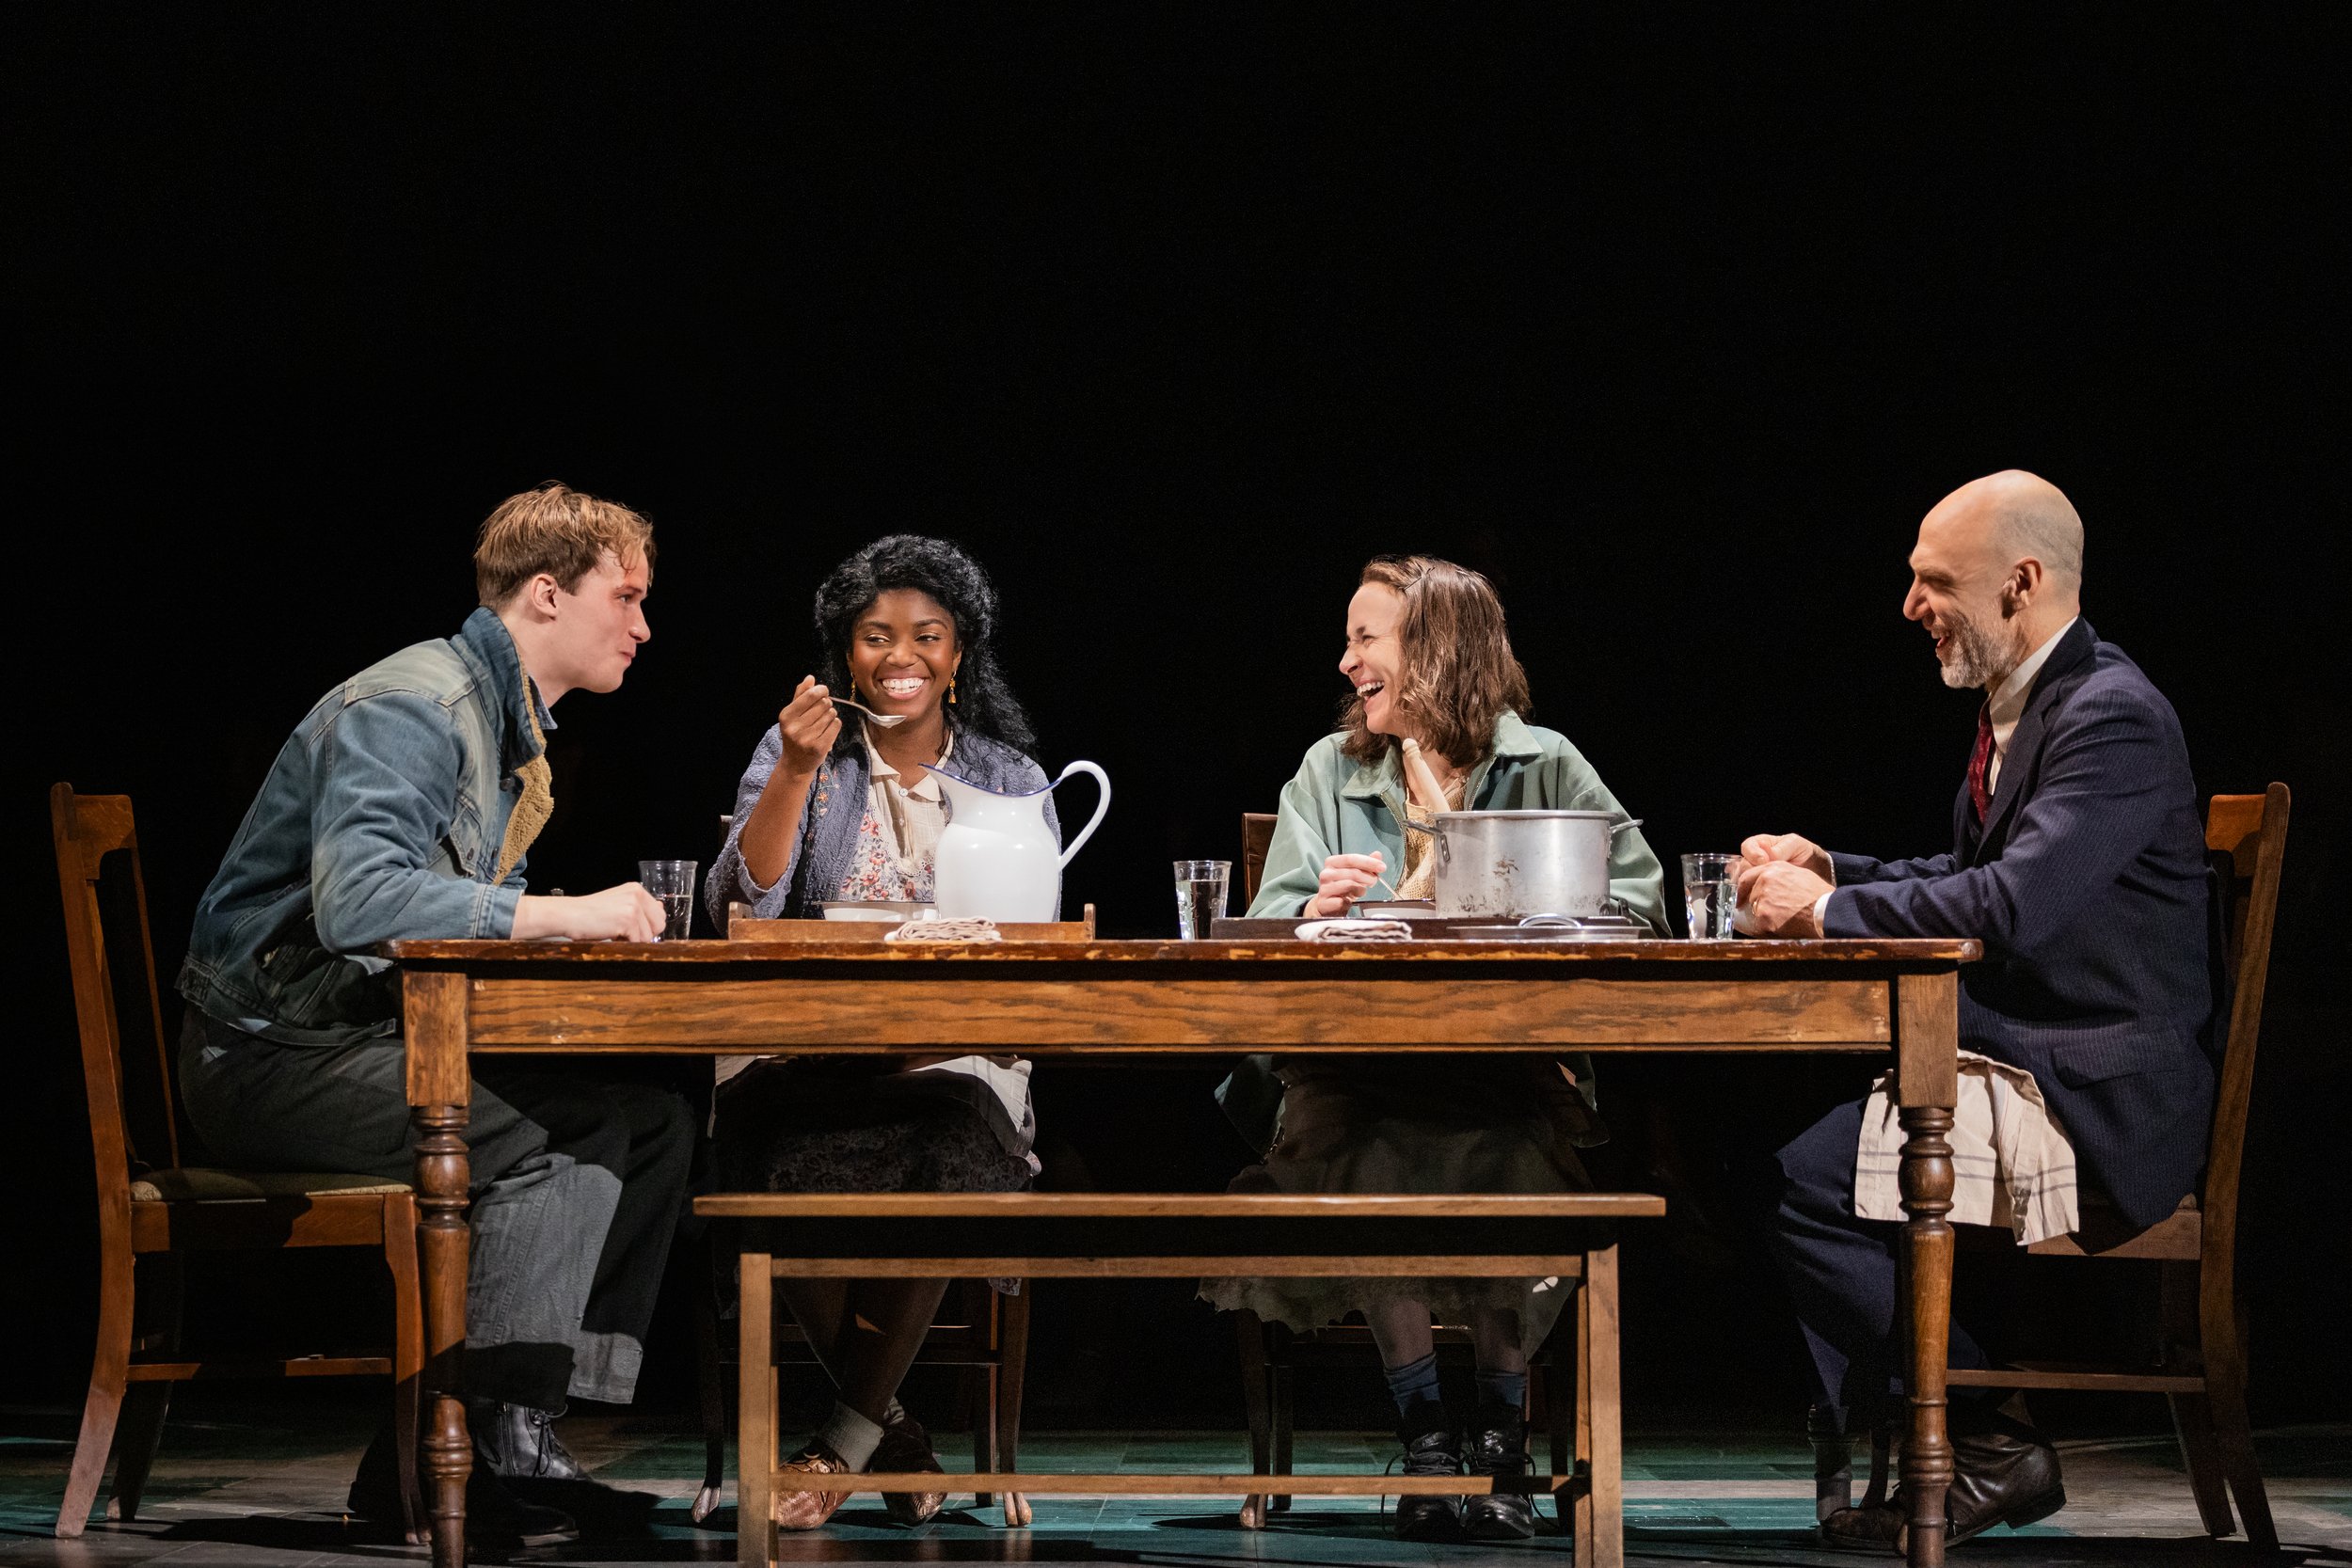 L-R Ben Biggers, Sharaé Moultrie, Jennifer Blood and John Schiappa in the GIRL FROM THE NORTH COUNTRY North American Tour (photo by Evan Zimmerman for MurphyMade).jpg